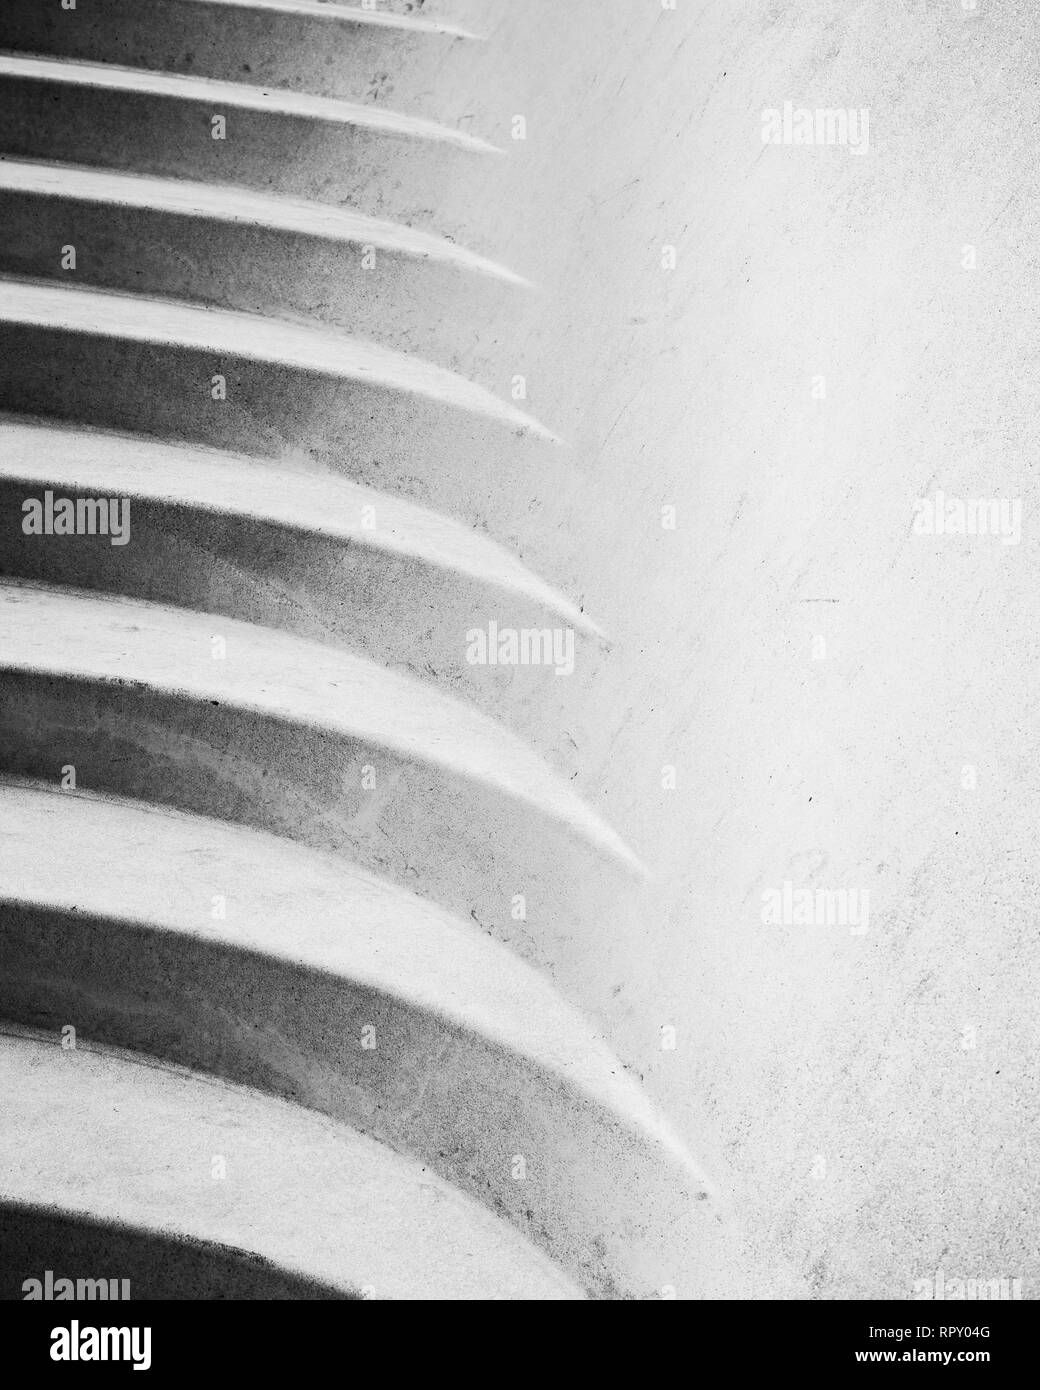 curved steps form abstract pattern Stock Photo